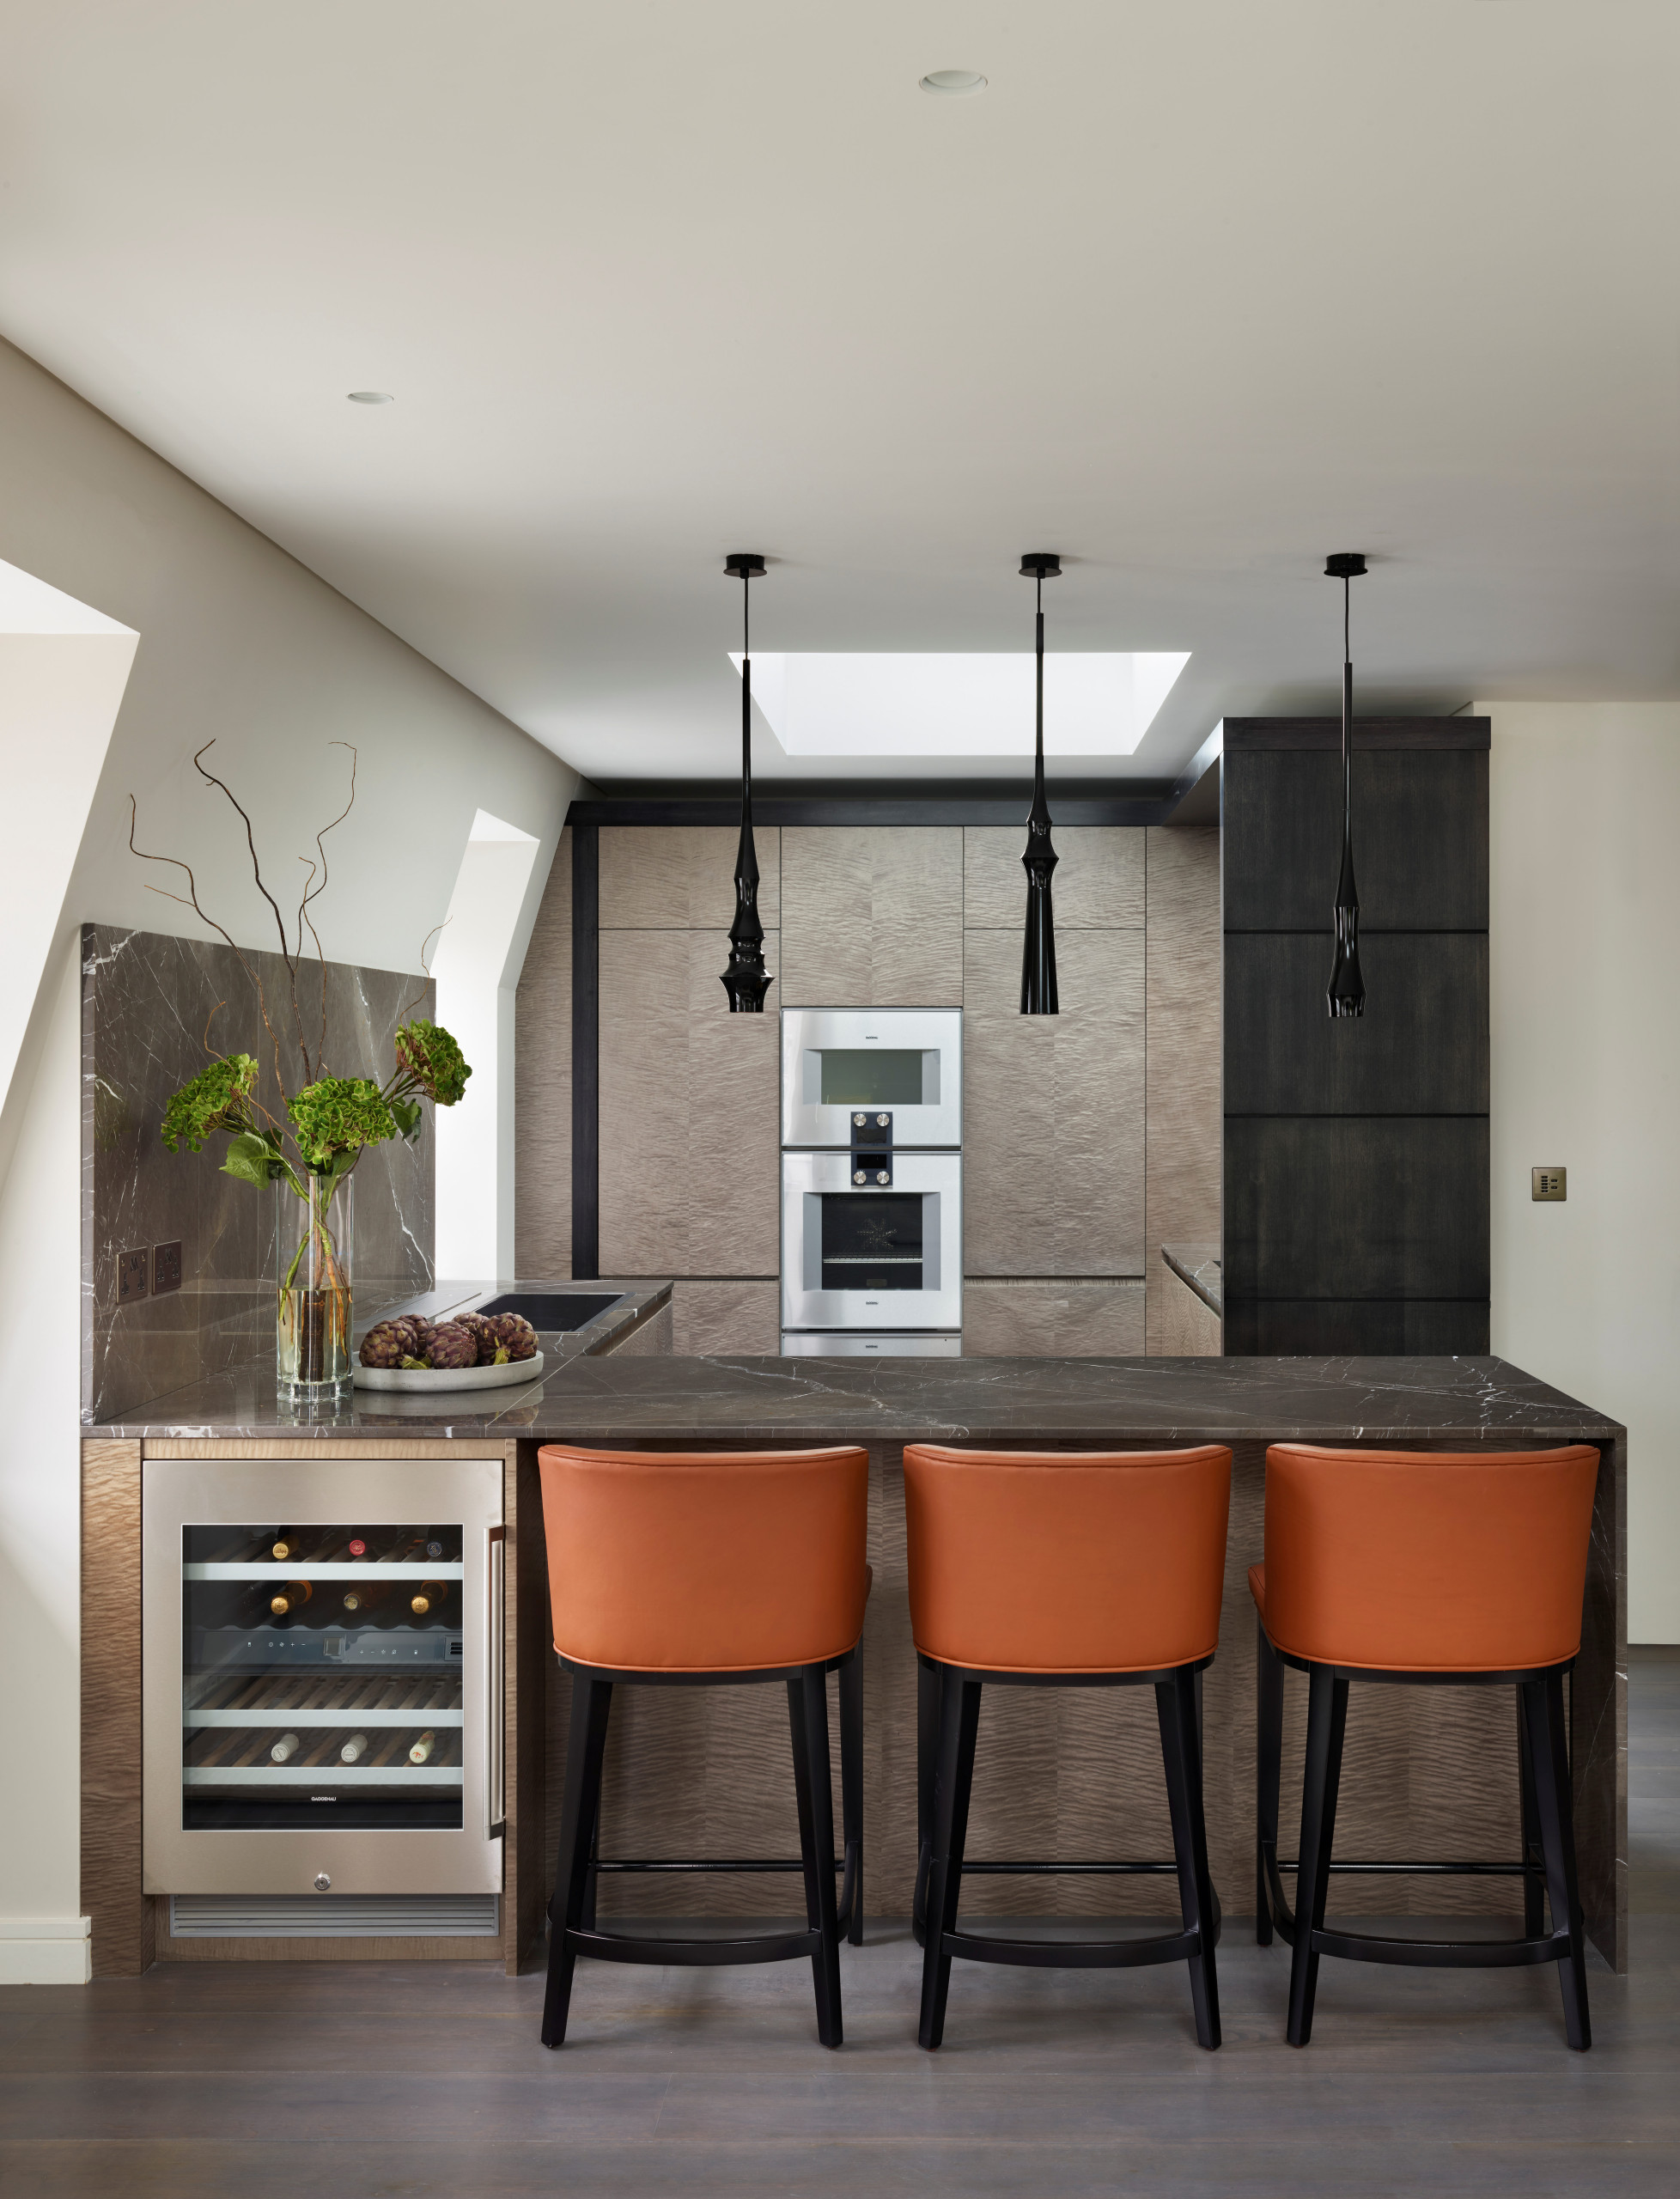 Mayfair Penthouse - Contemporary Open Plan Kitchen with Gaggenau Appliances  - Contemporary - Kitchen - Buckinghamshire - by Simon Taylor Furniture |  Houzz